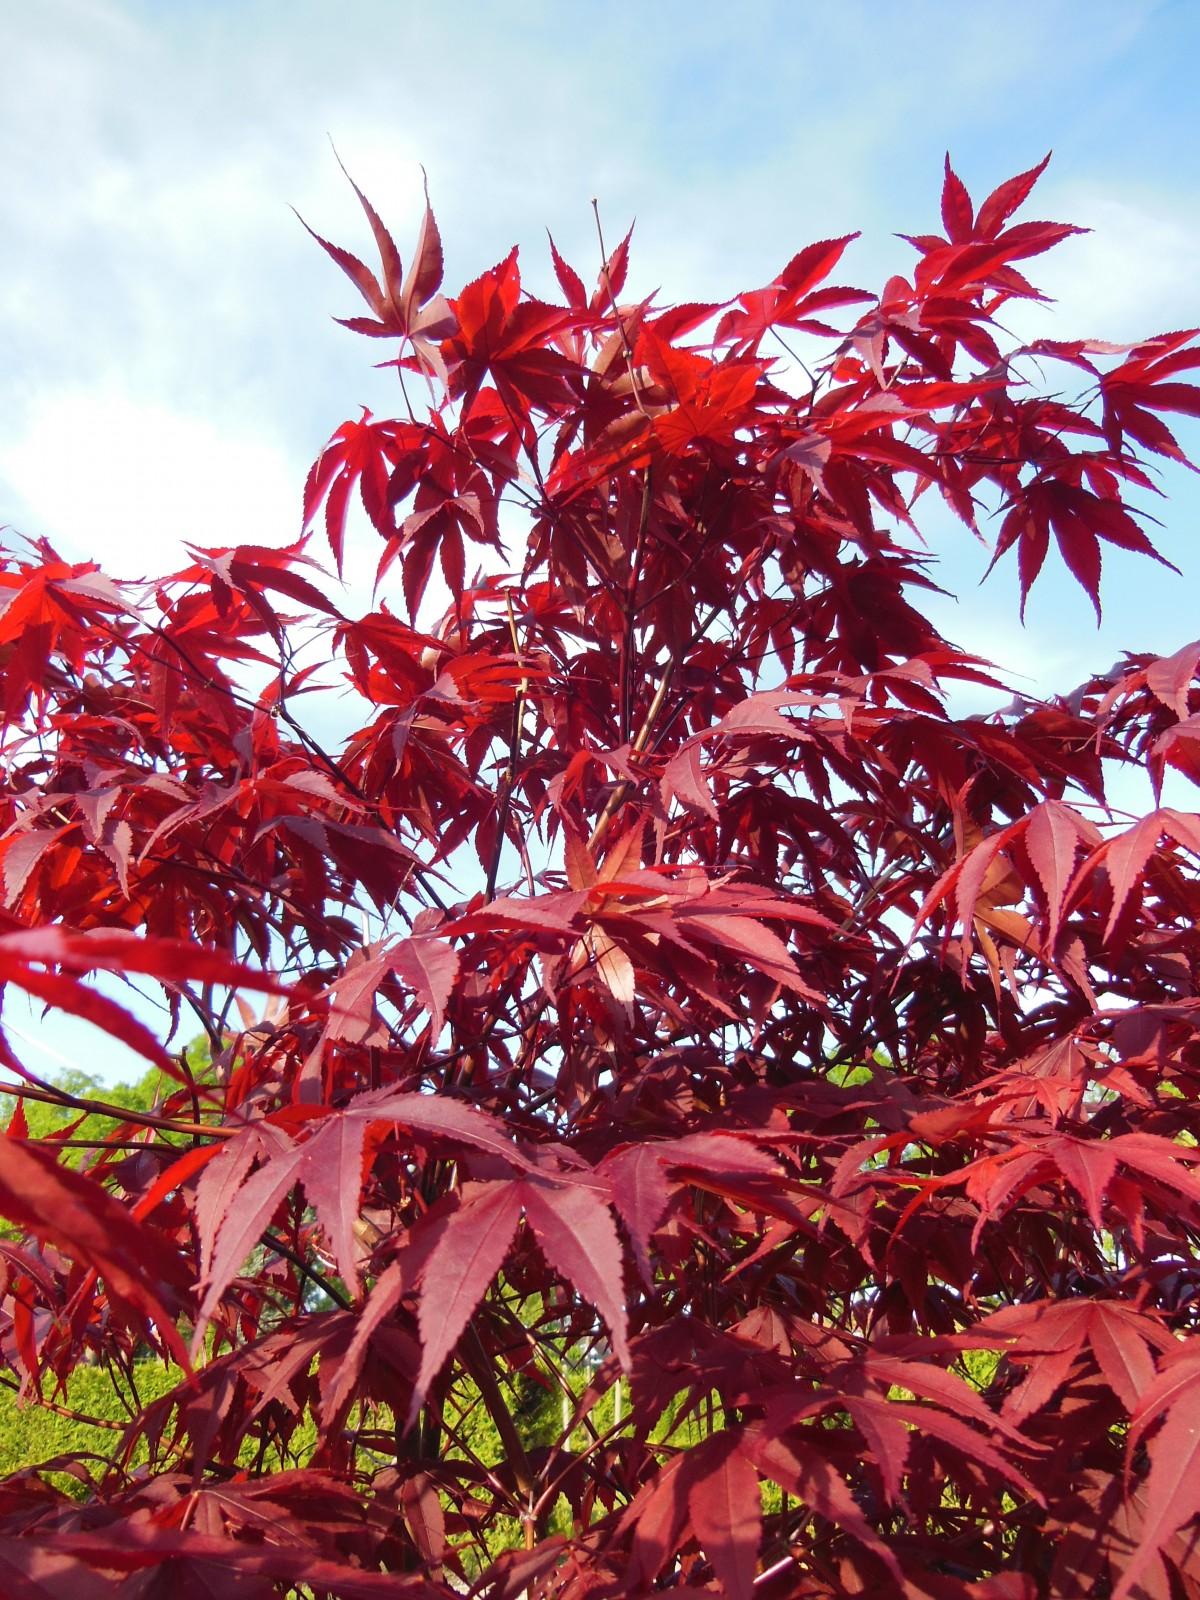 Maple-shaped, red color leaves engraved with tiny red veins spreading throughout on light-brown stems.  